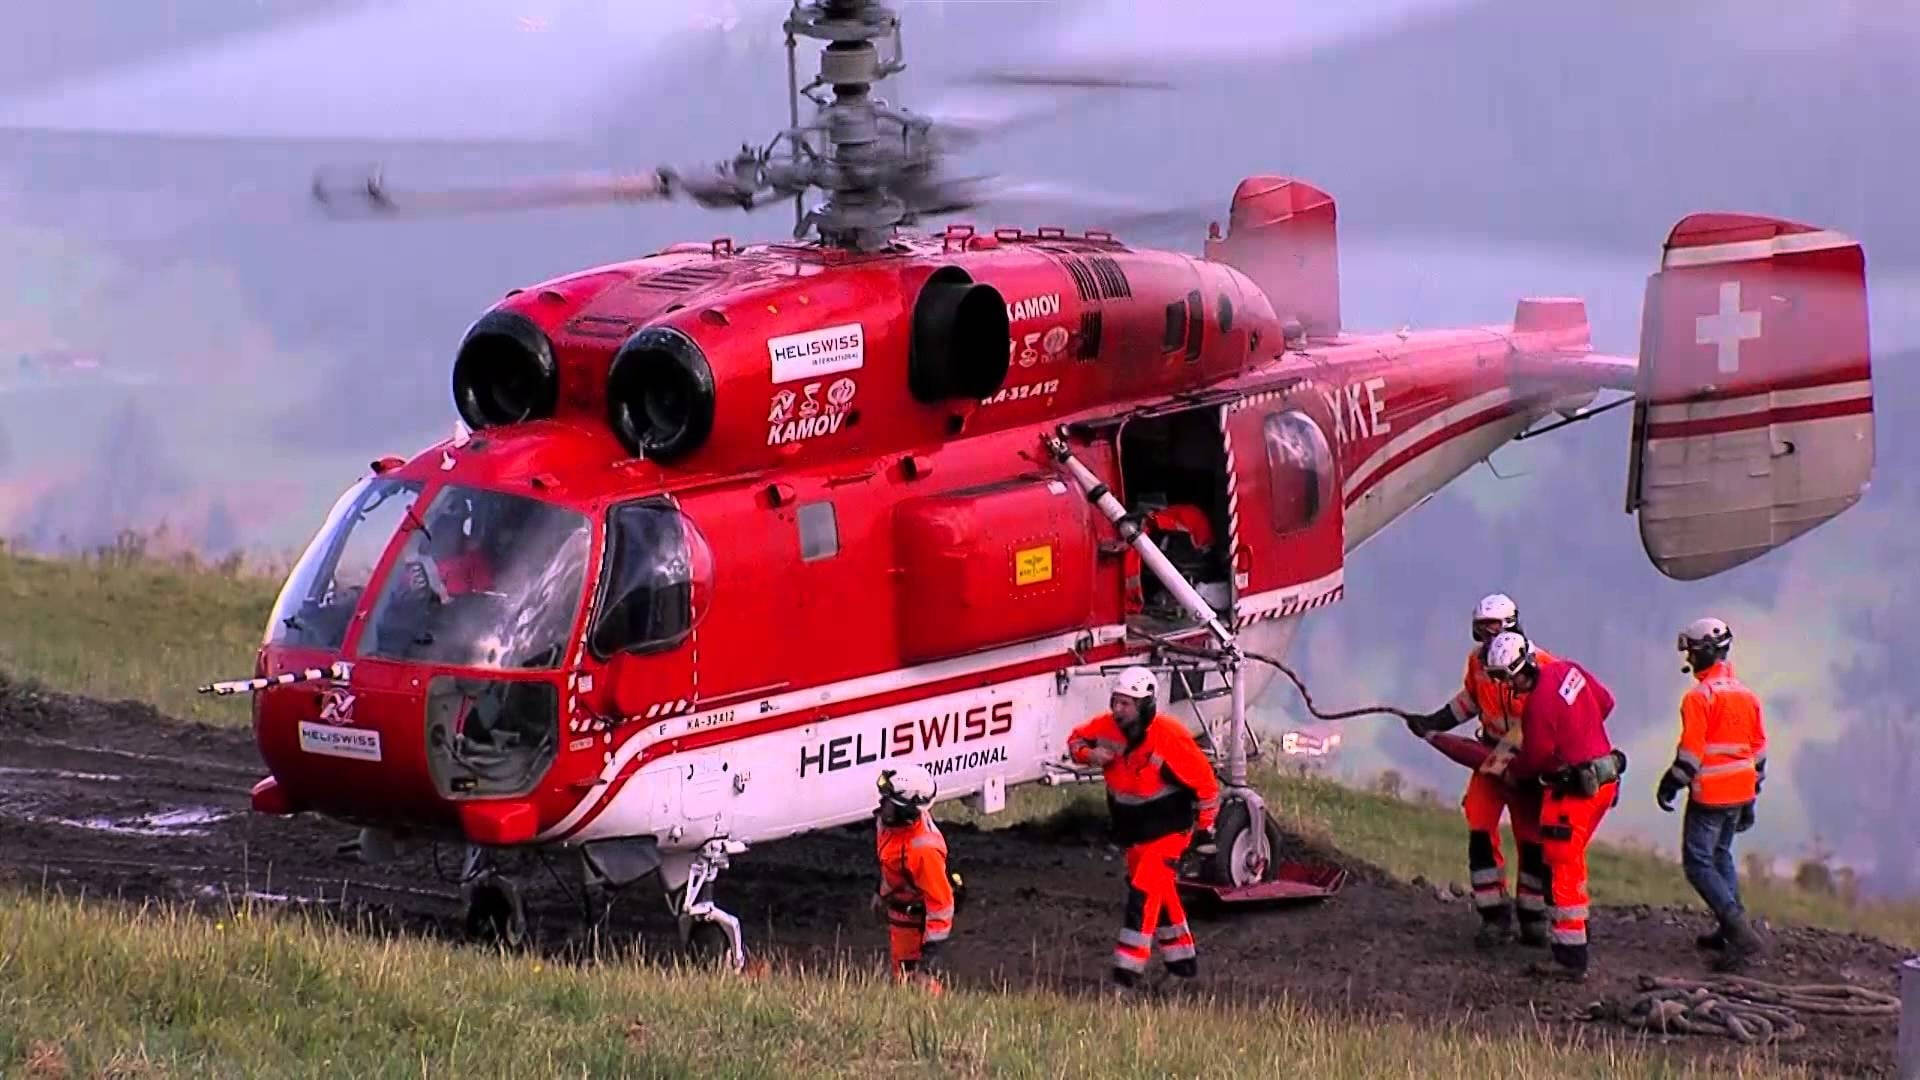 Brave Firefighters with Helicopter in Action Wallpaper